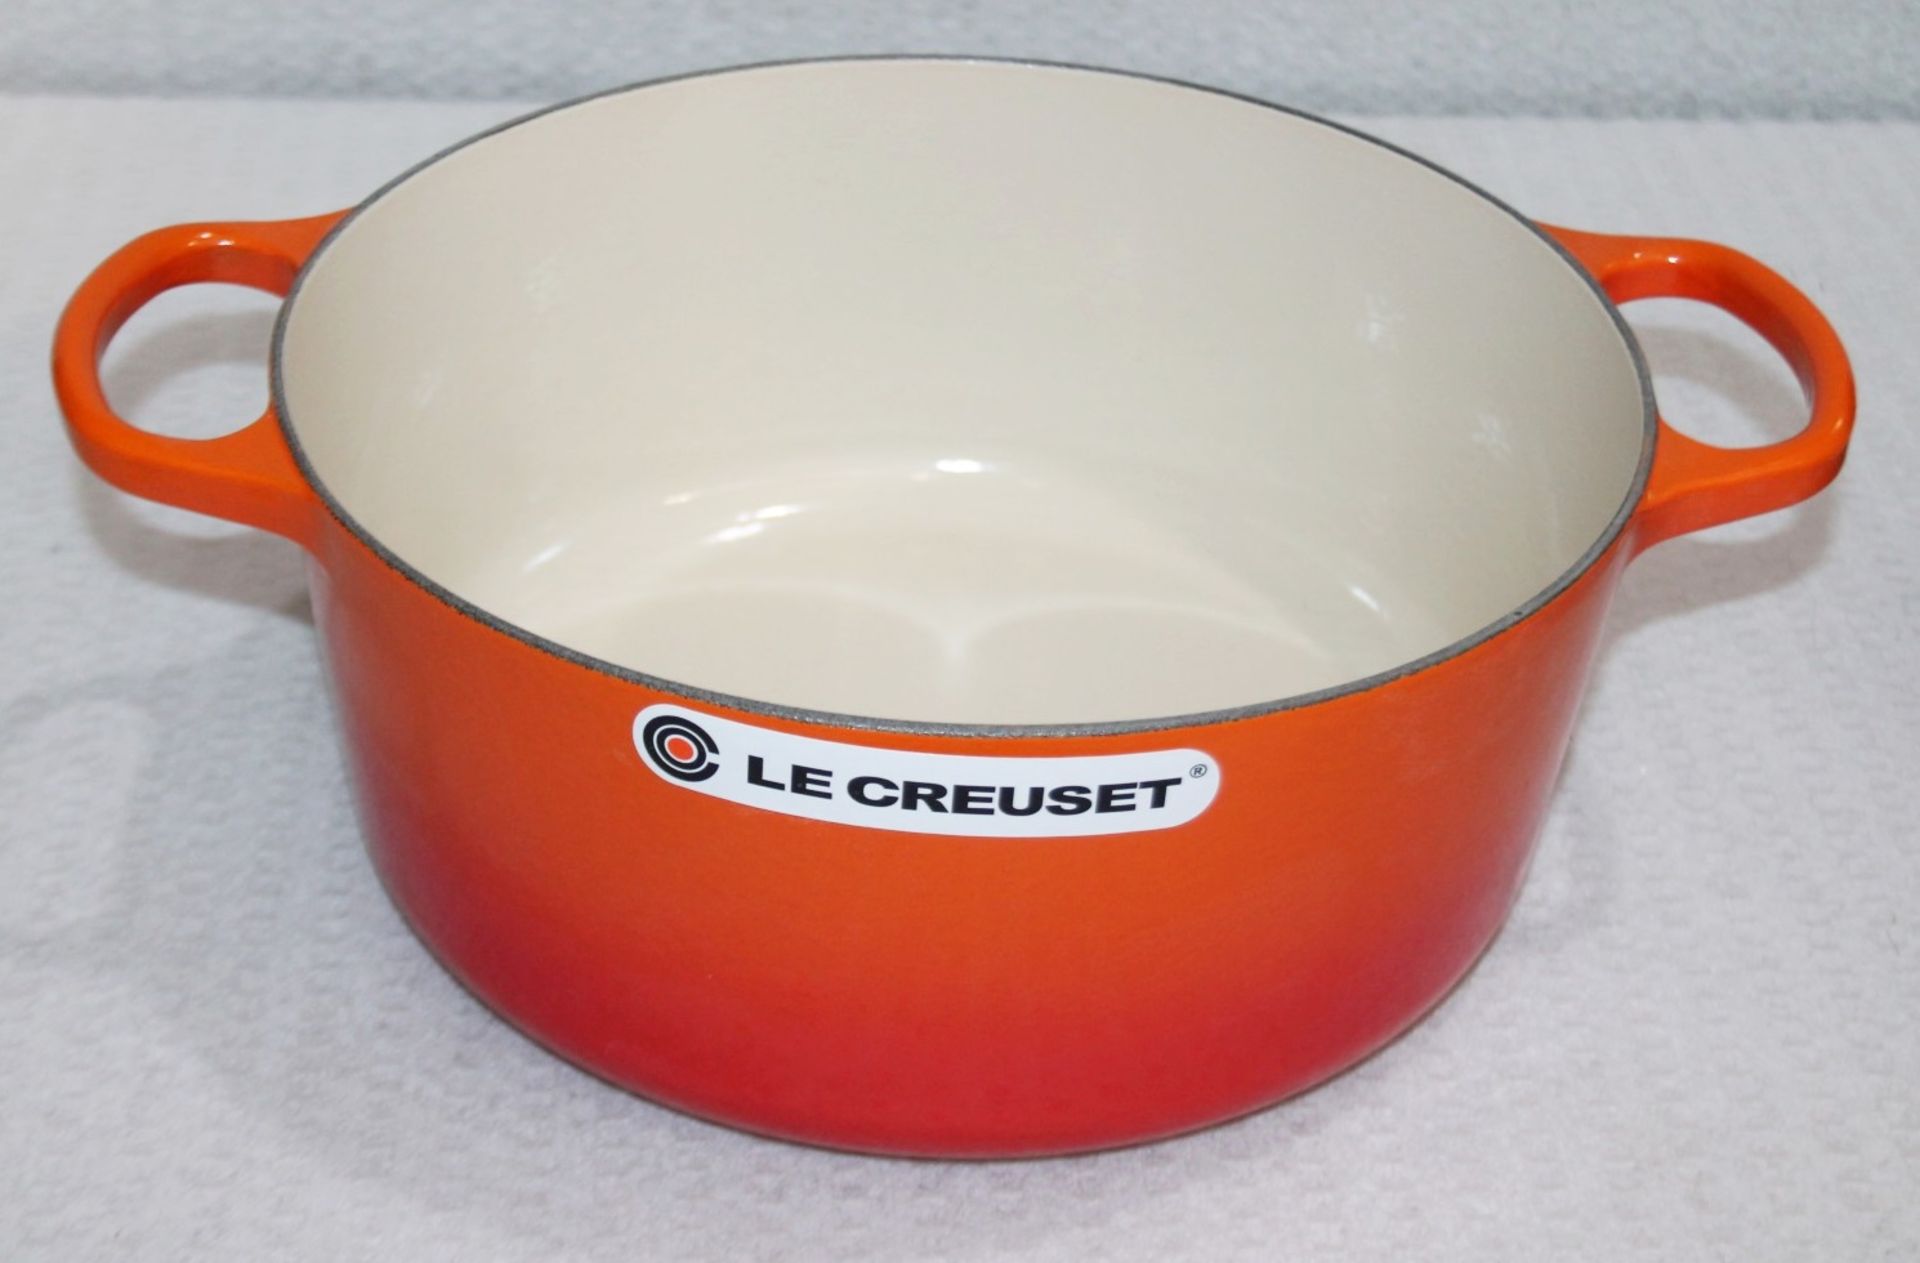 1 x LE CREUSET 'Volcanic' Enamelled Cast Iron Round Casserole Dish With Lid (30cm) - RRP £355.00 - Image 4 of 13